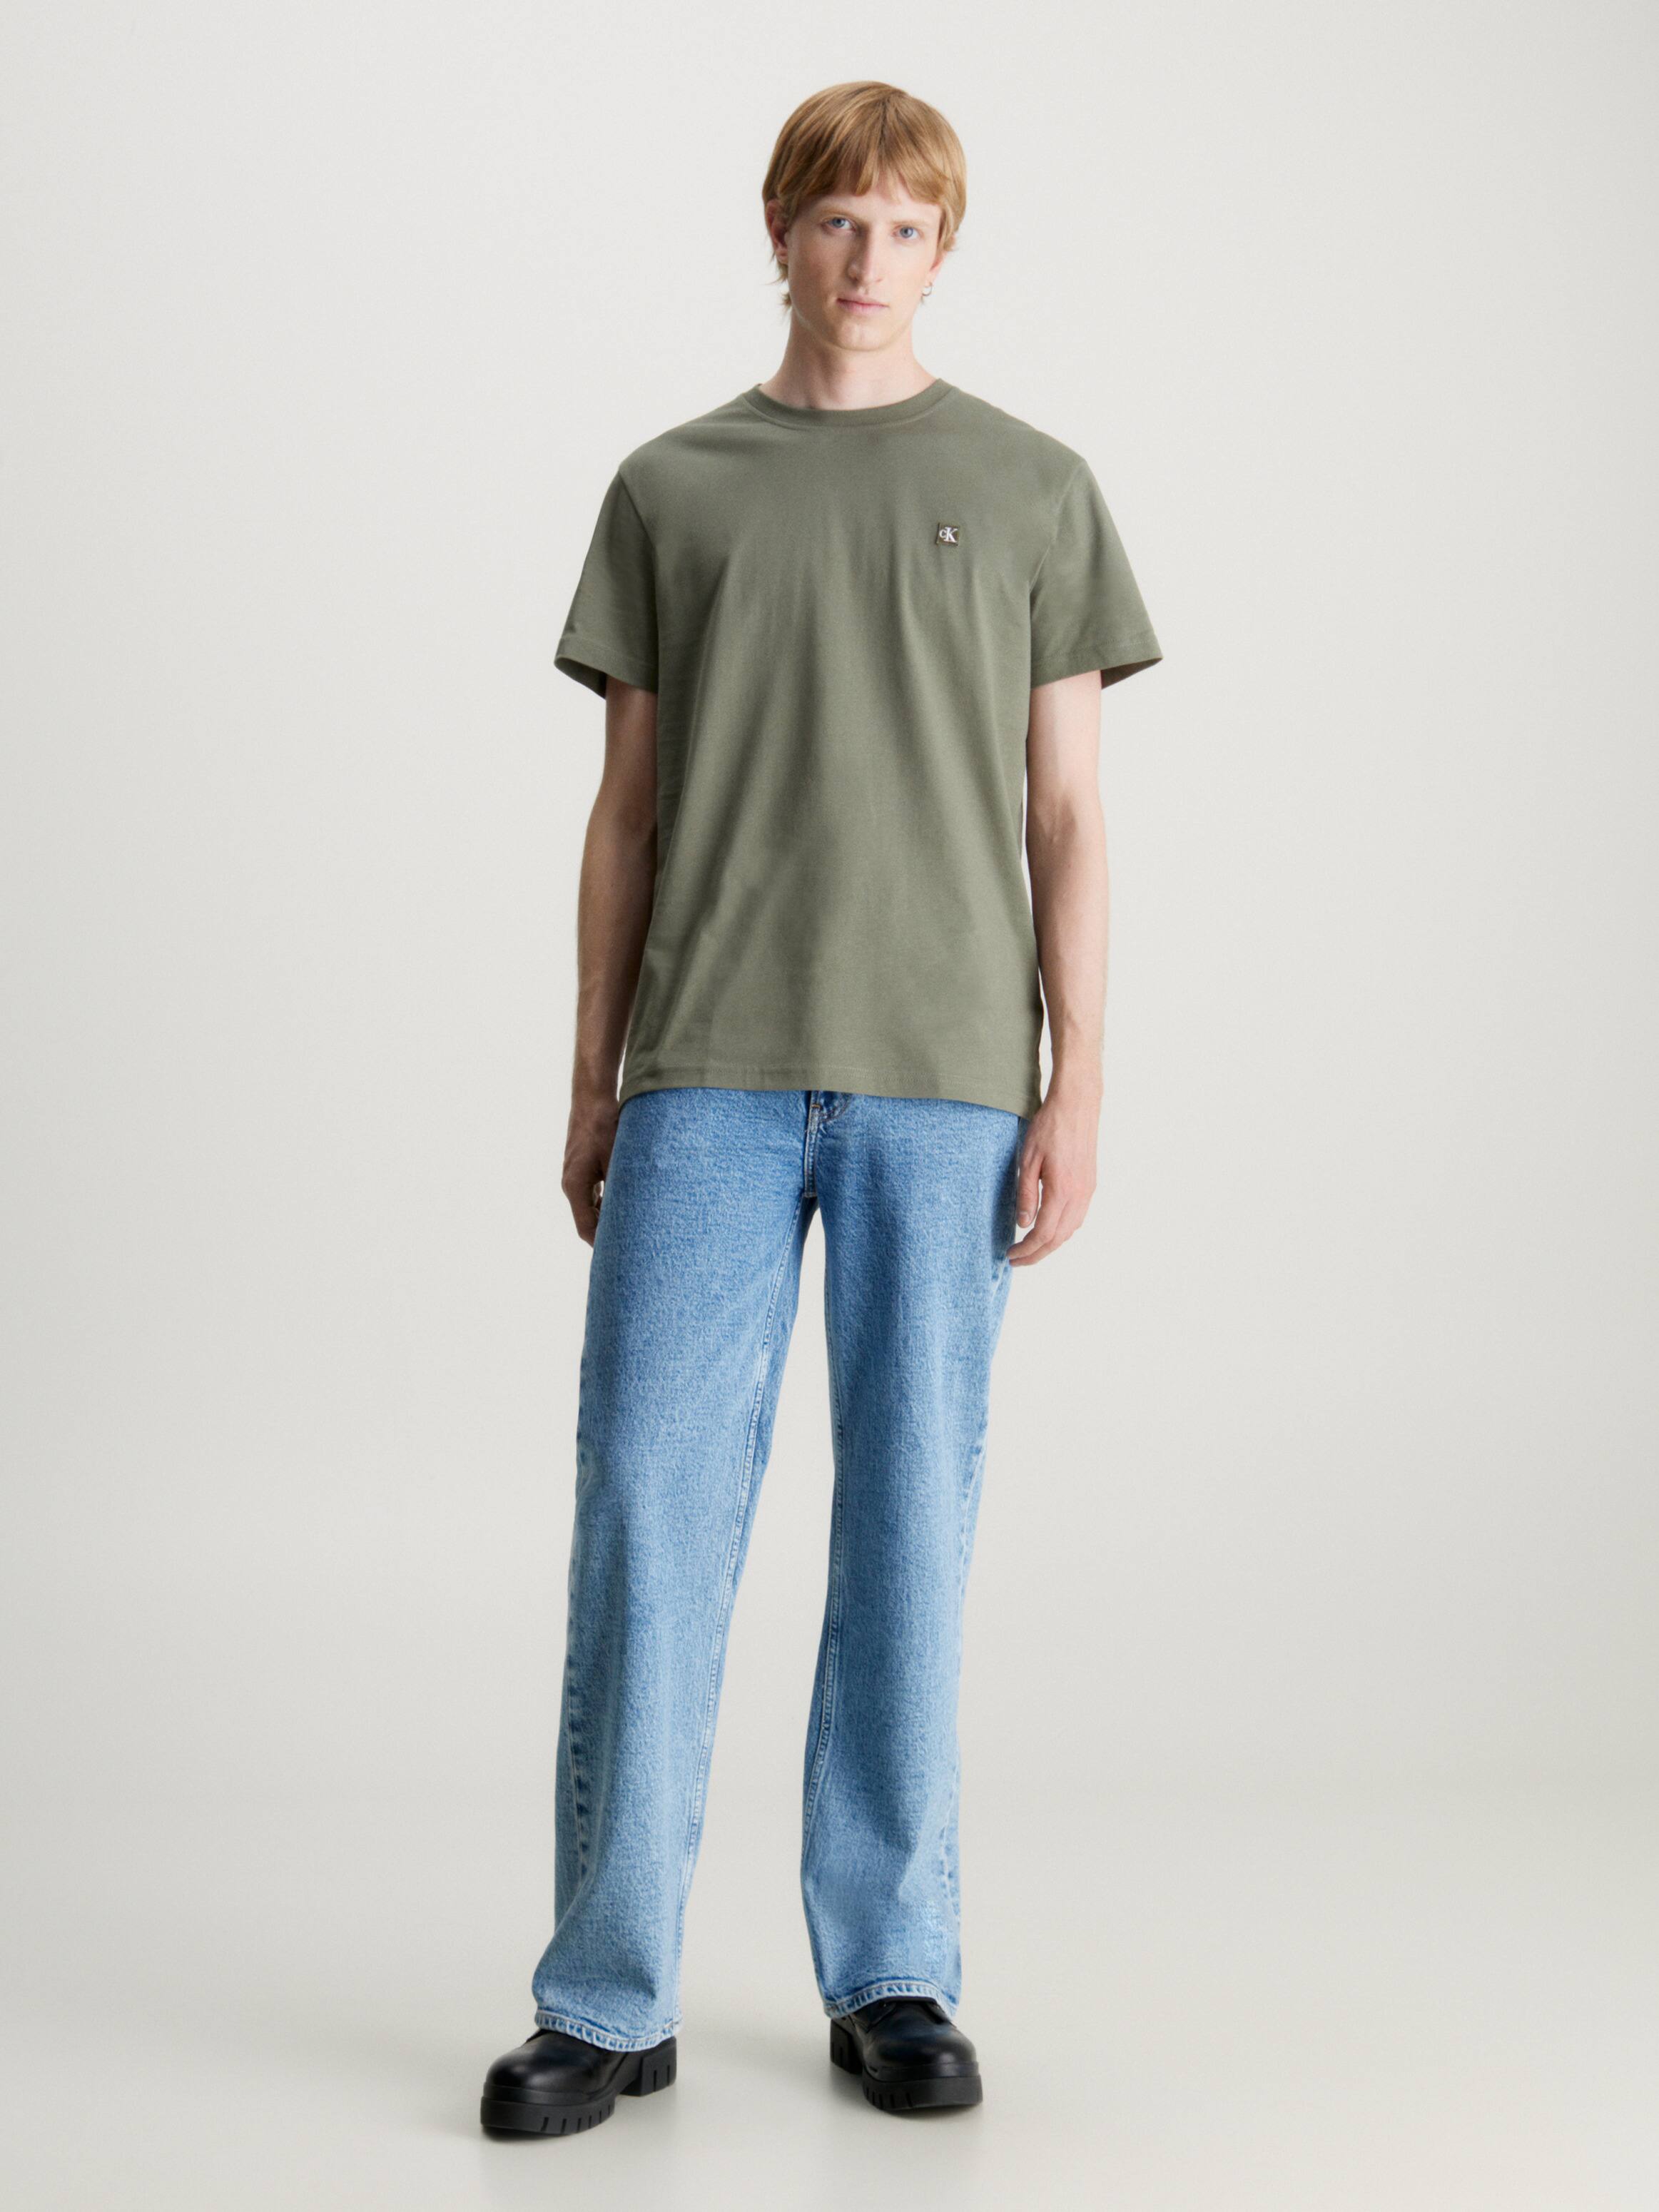 Embroidered Badge Tee In Dust Olive